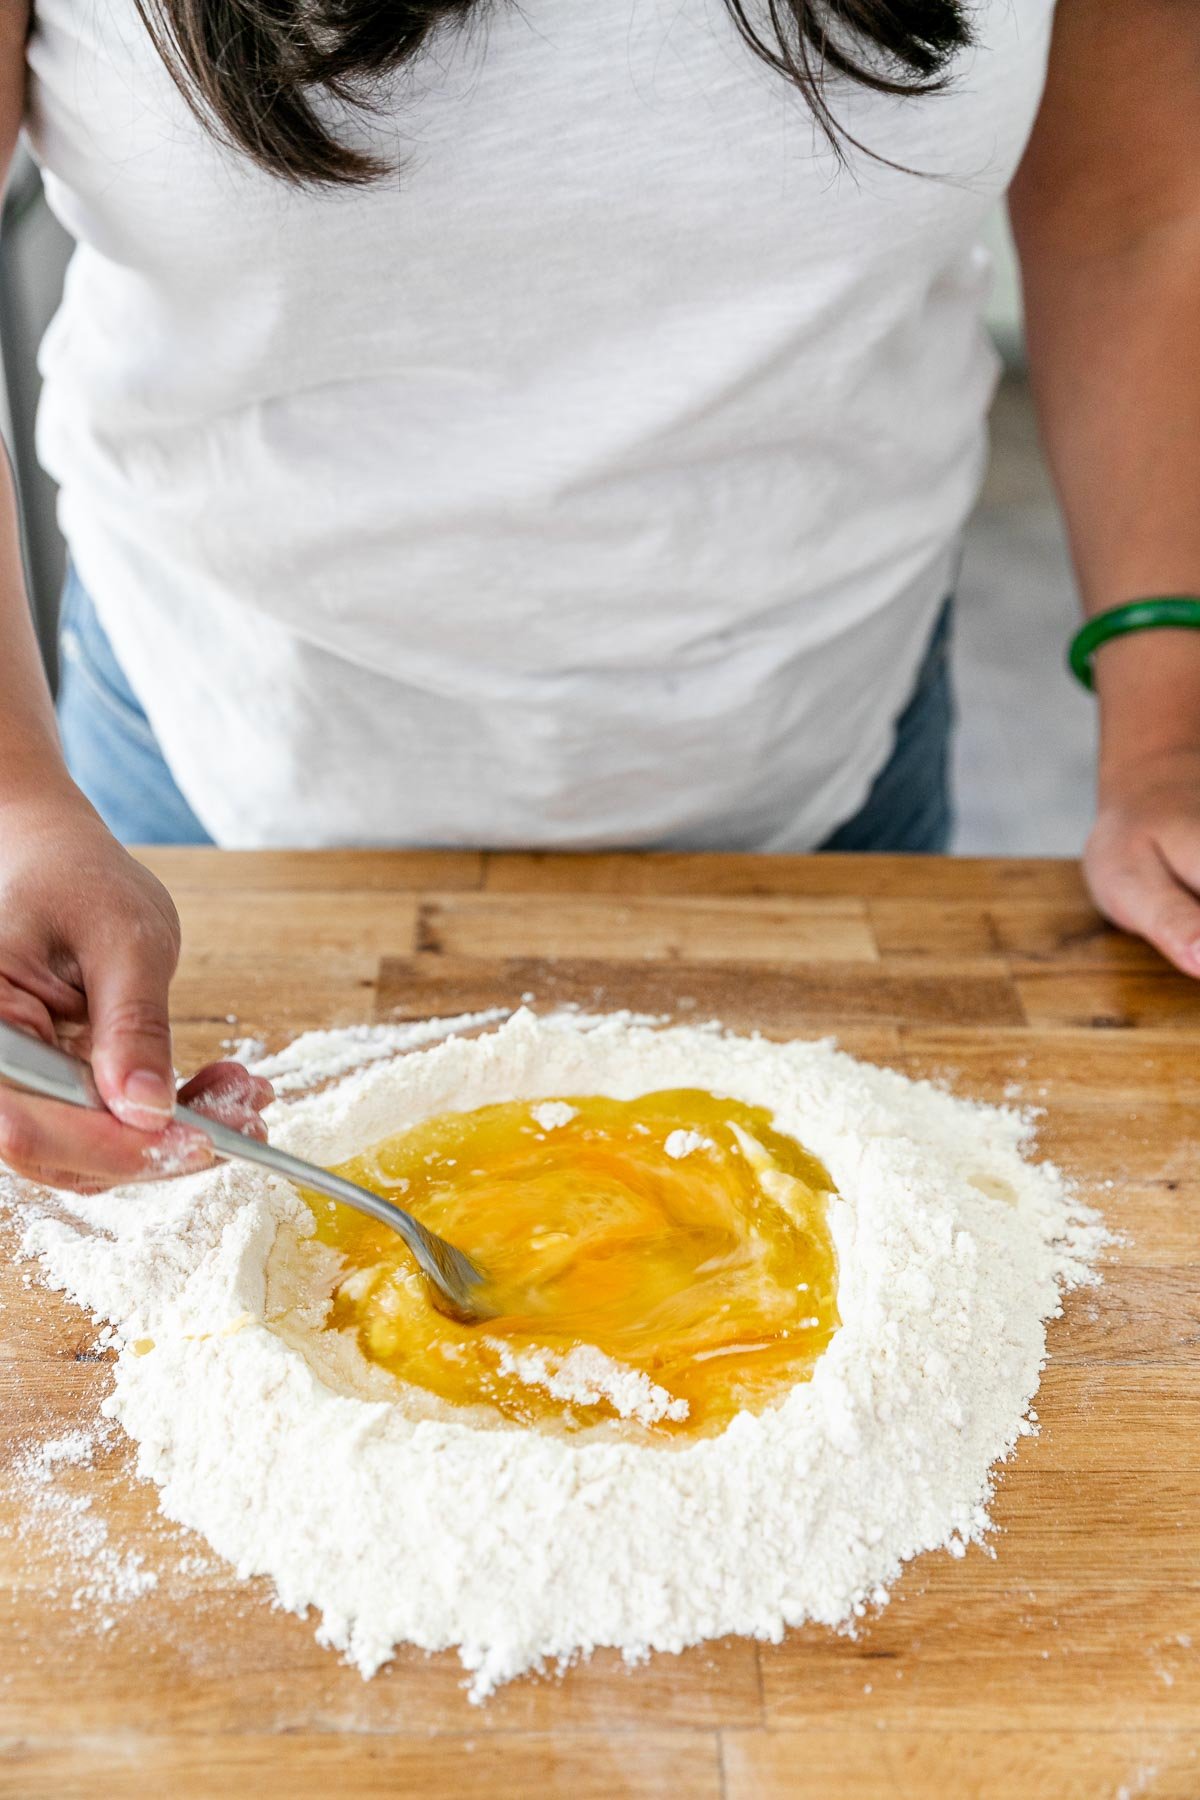 How to Make Homemade Pasta, Step 2: Mixing the Pasta Dough. Jess of Plays Well With Butter uses a fork to break up the eggs & whisk the wet ingredients inside of the well created with flour to make fresh pasta dough. The ingredients sit atop a clean butcher block countertop.